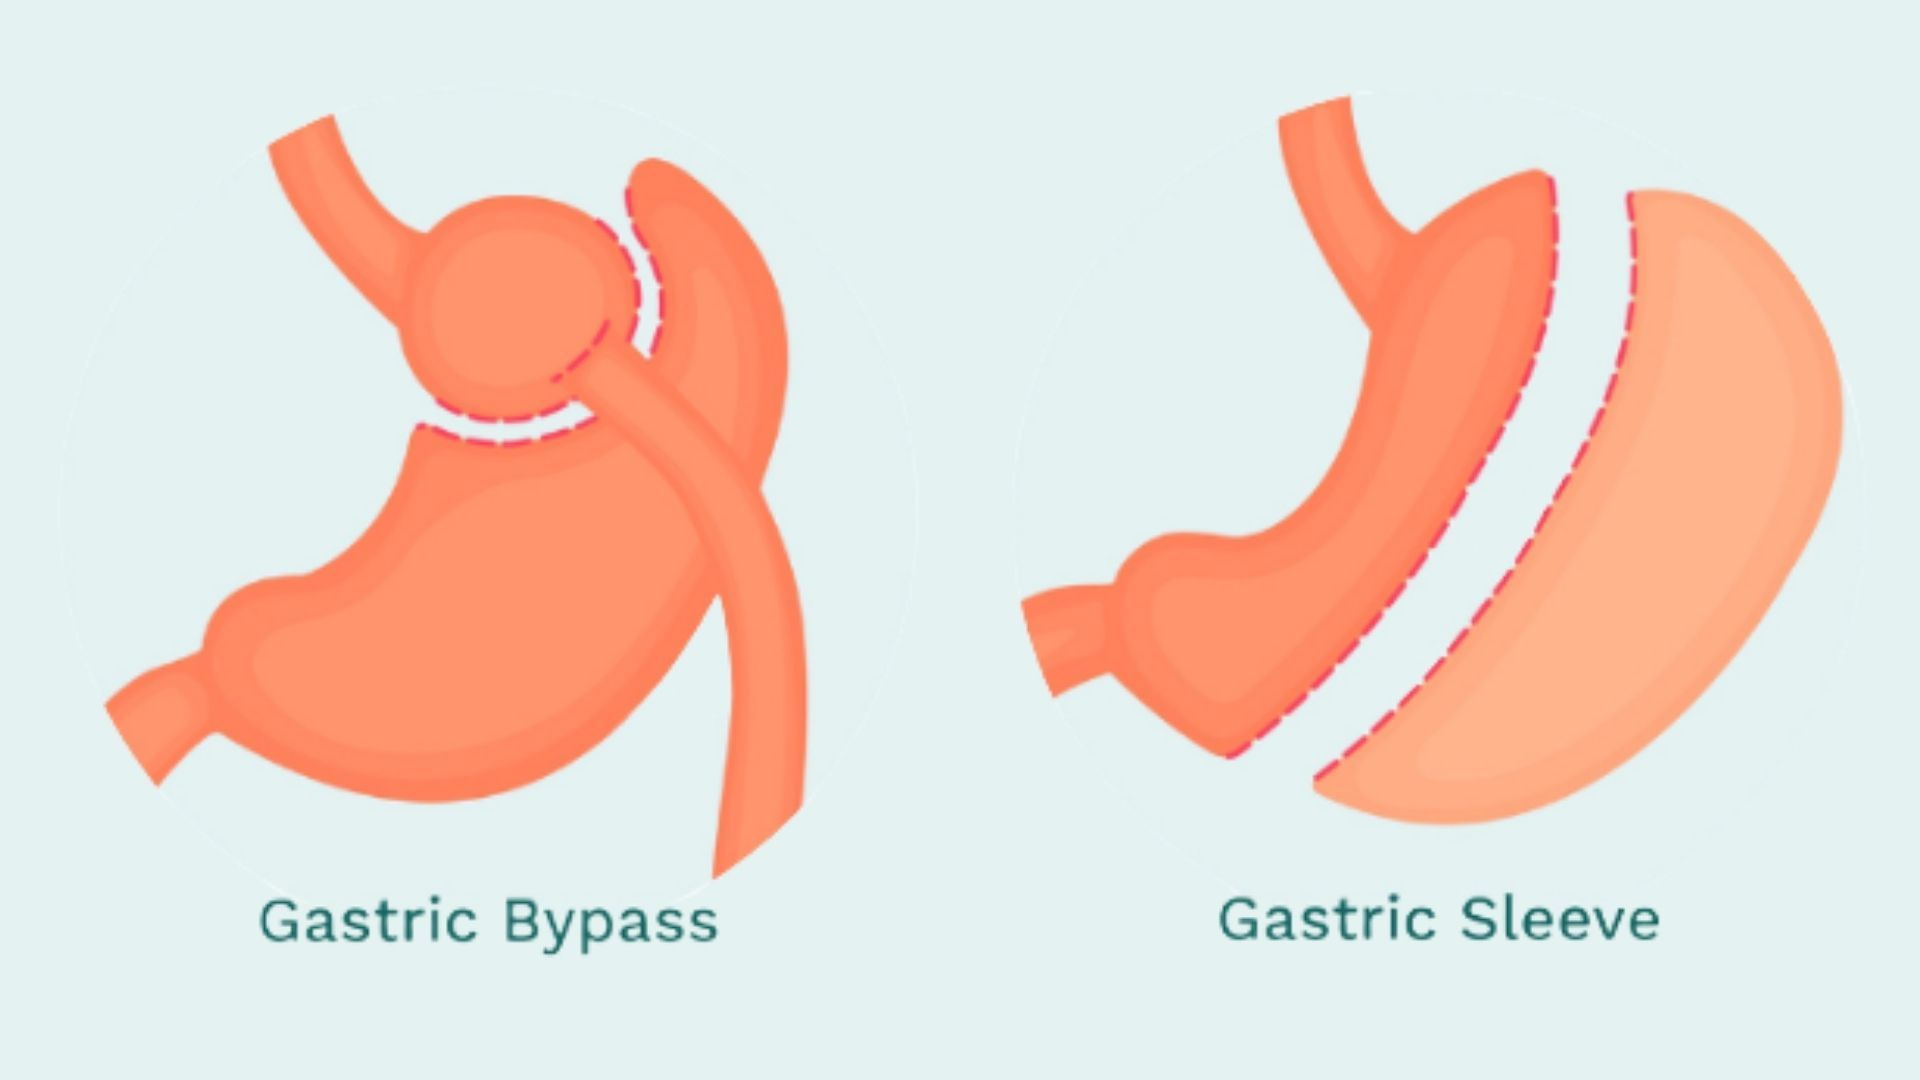 Gastric Sleeve vs. Gastric Bypass: The Main Differences Between Them